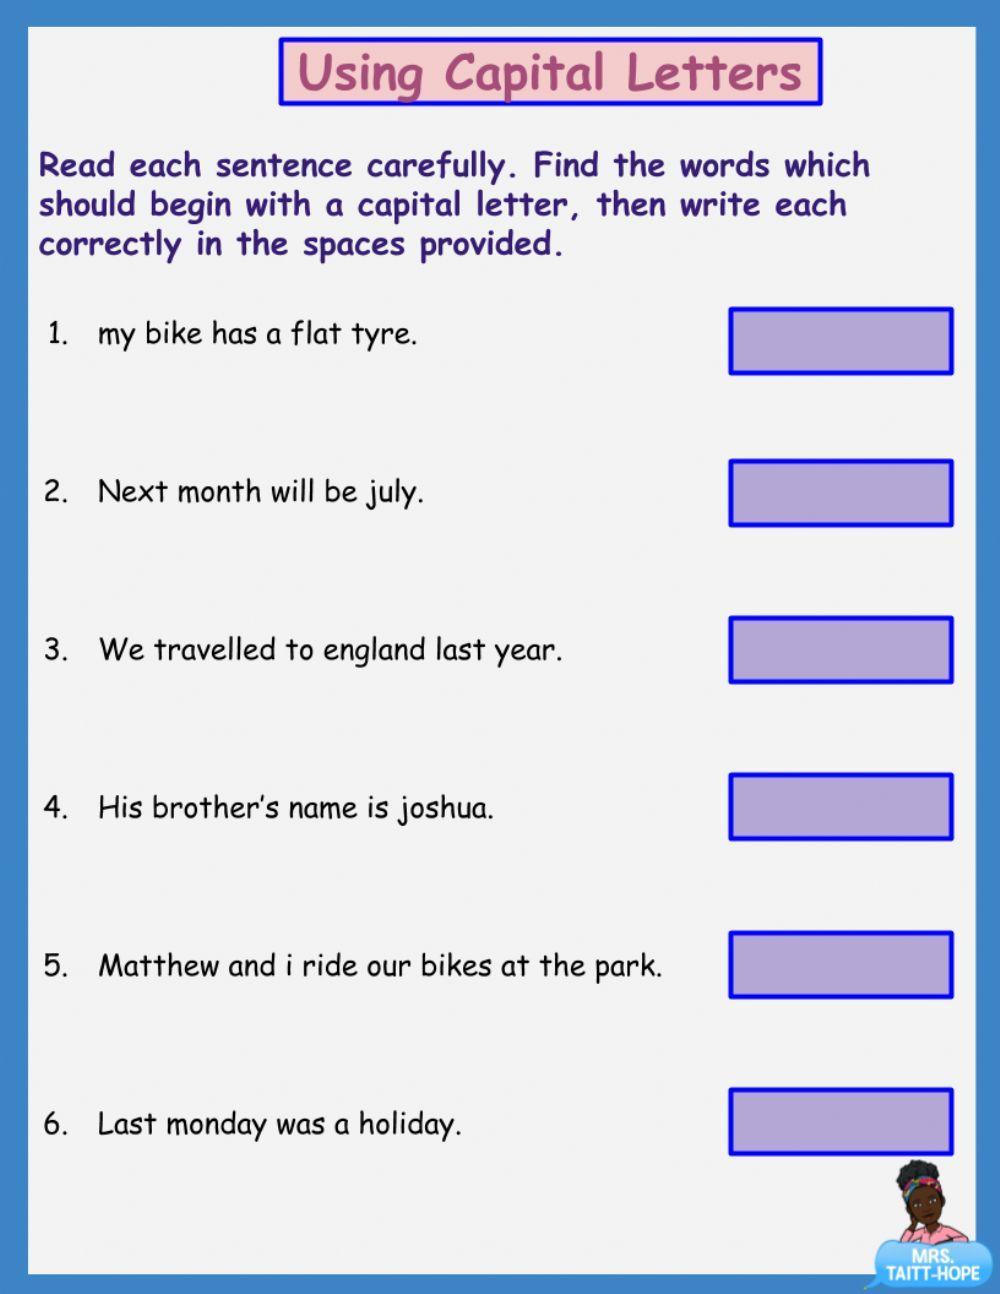 Using Capital Letters - 2